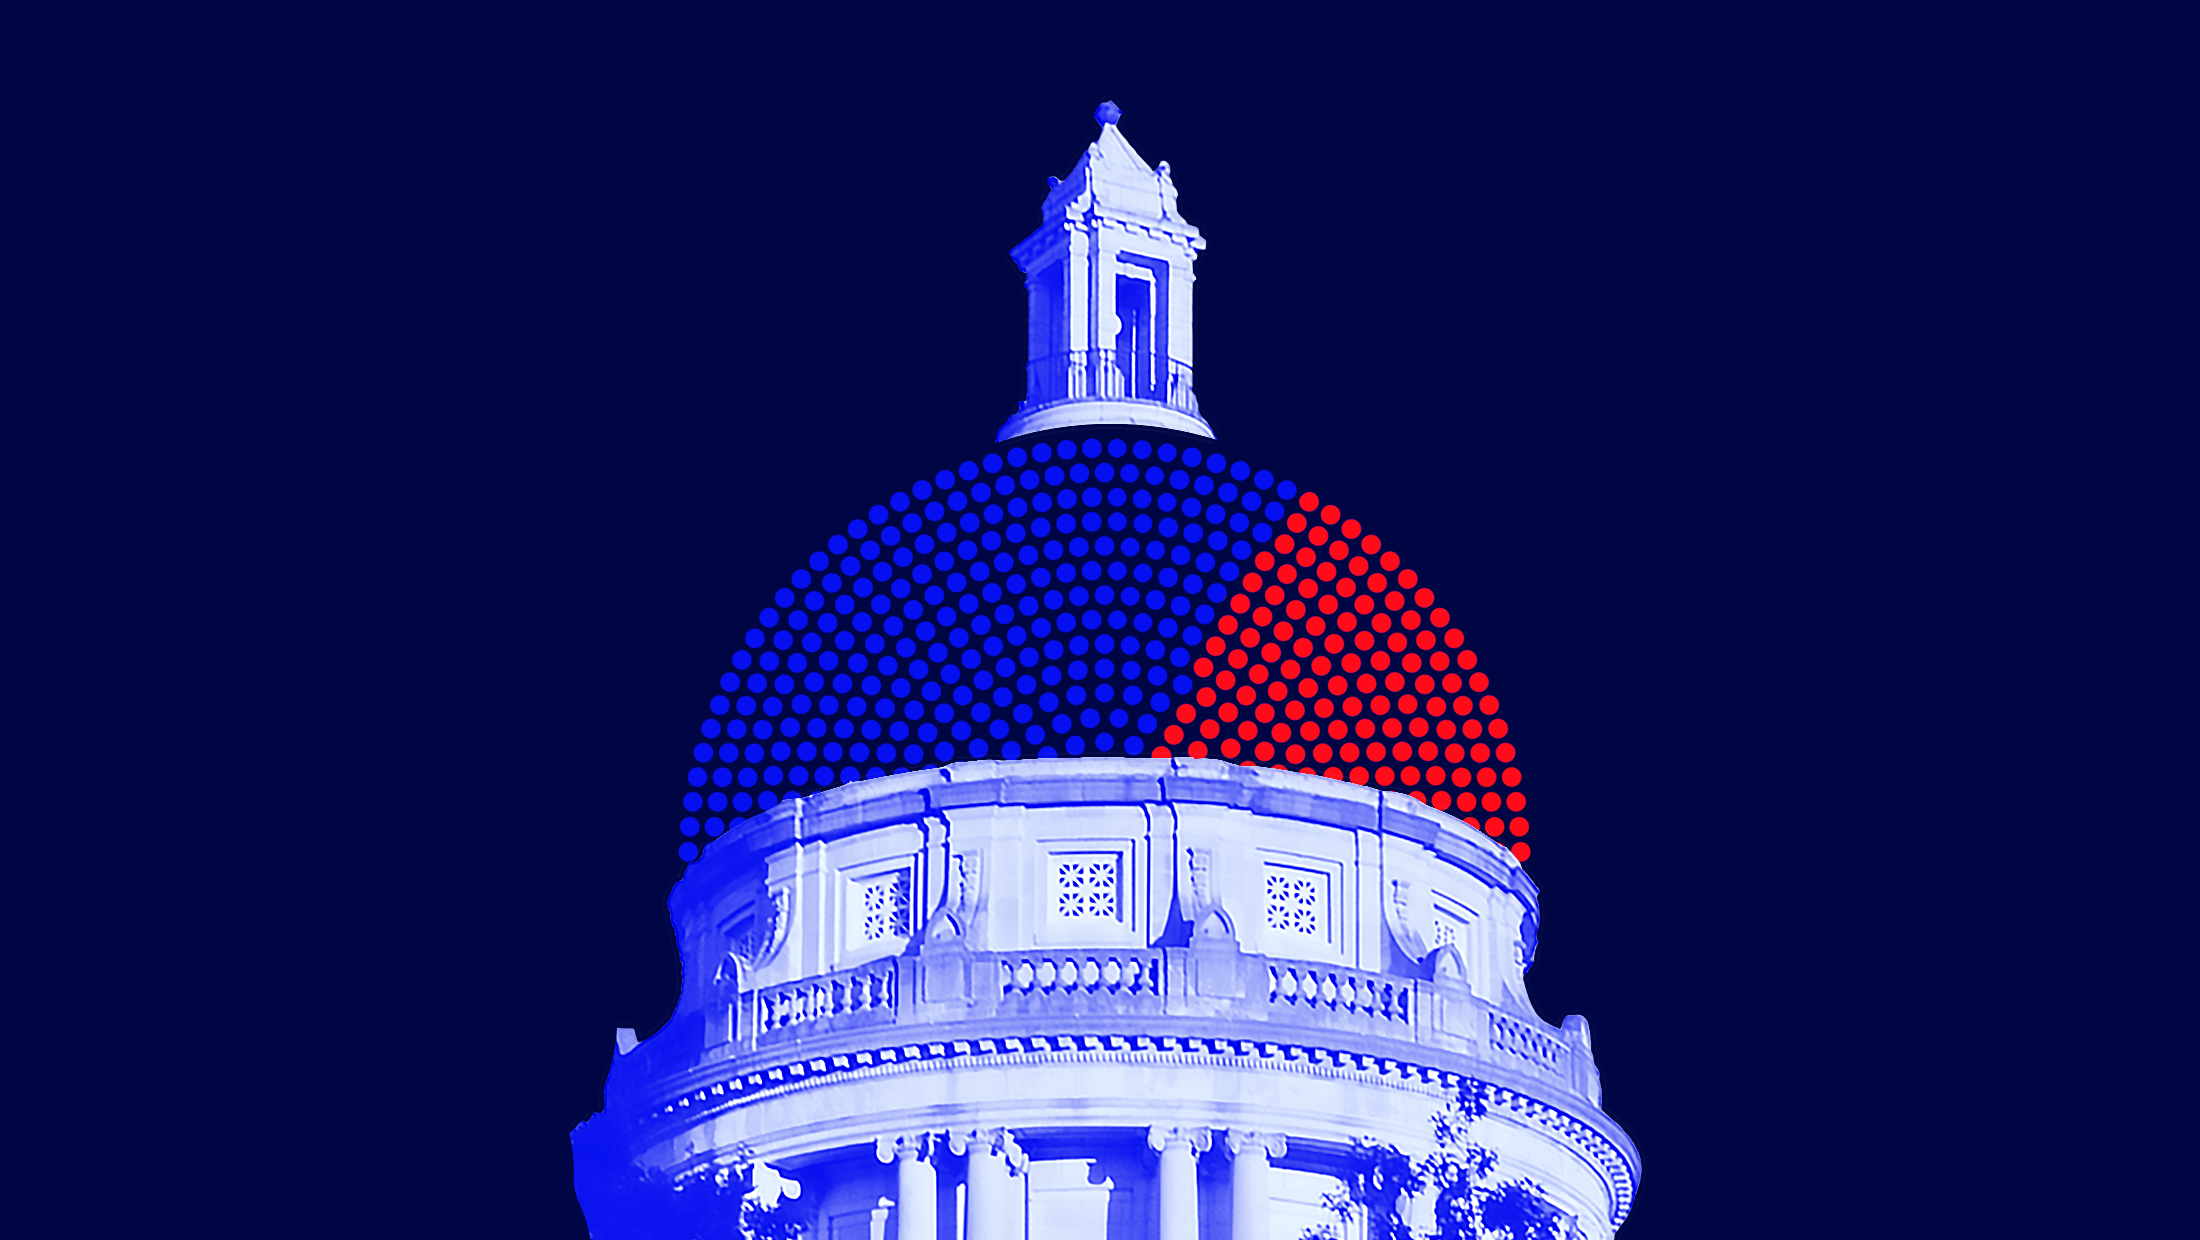 Dark blue background with dome of state capitol toned in blue but the dome is made up of mostly blue dots and some red dots to indicate state legislative seats.